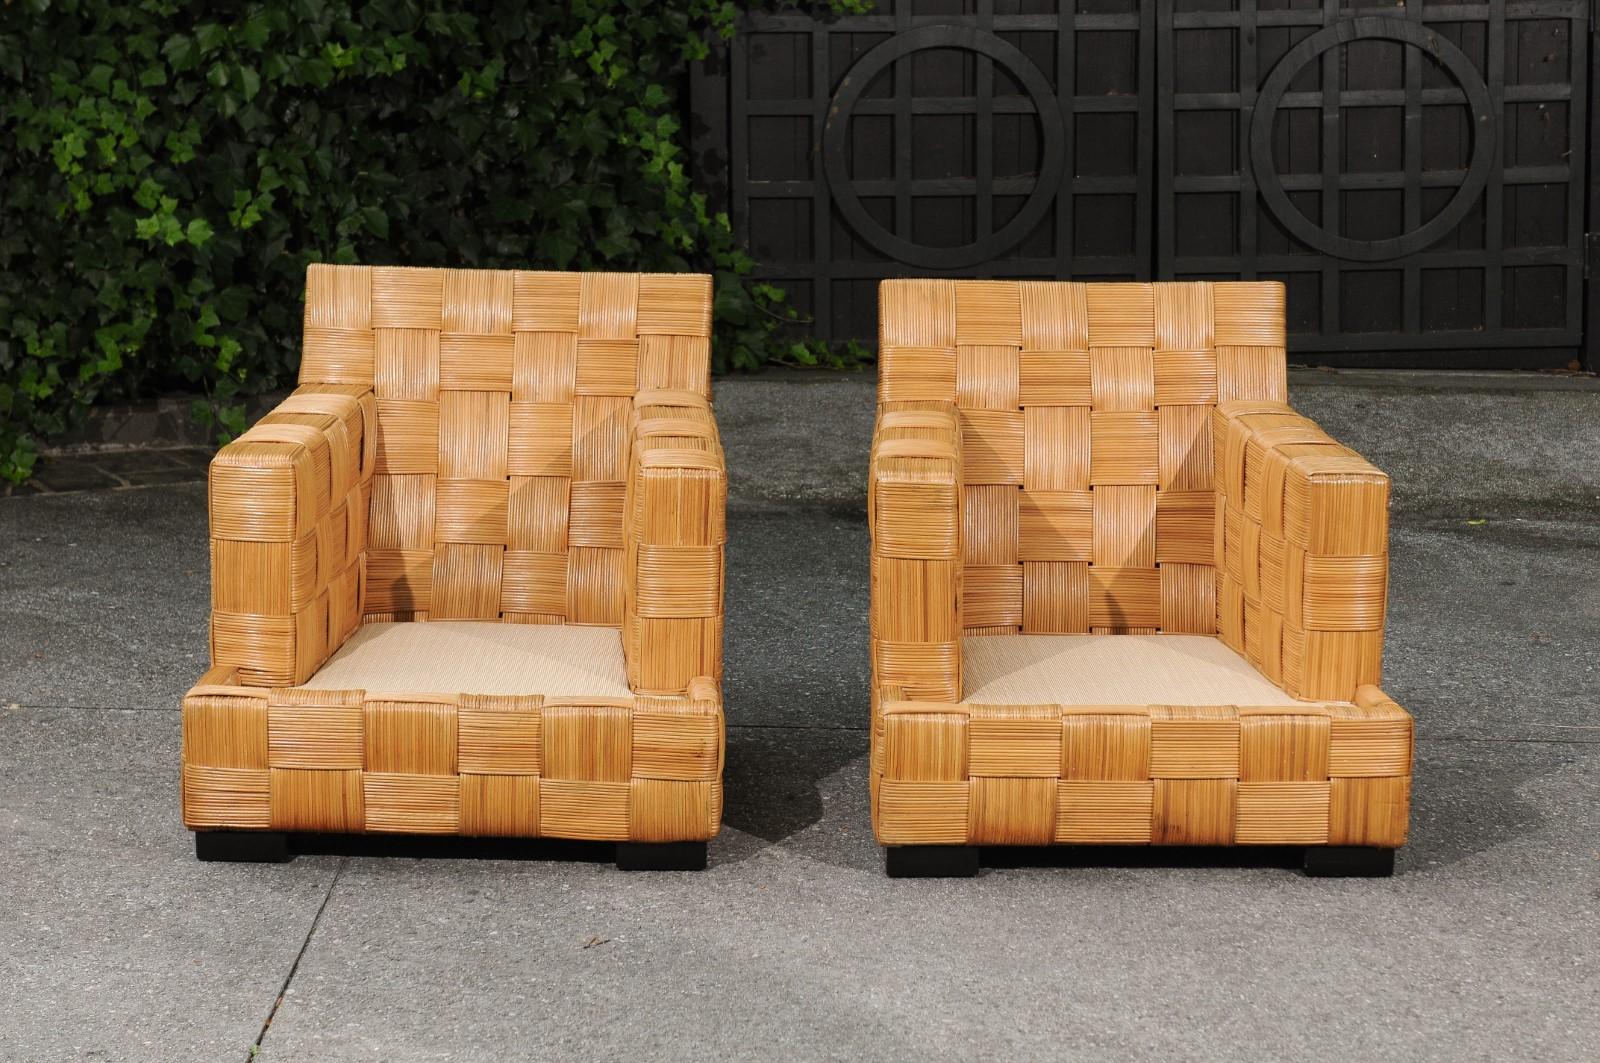 Unforgettable Set of of 4 Block Island Cane Chairs by John Hutton for Donghia For Sale 12